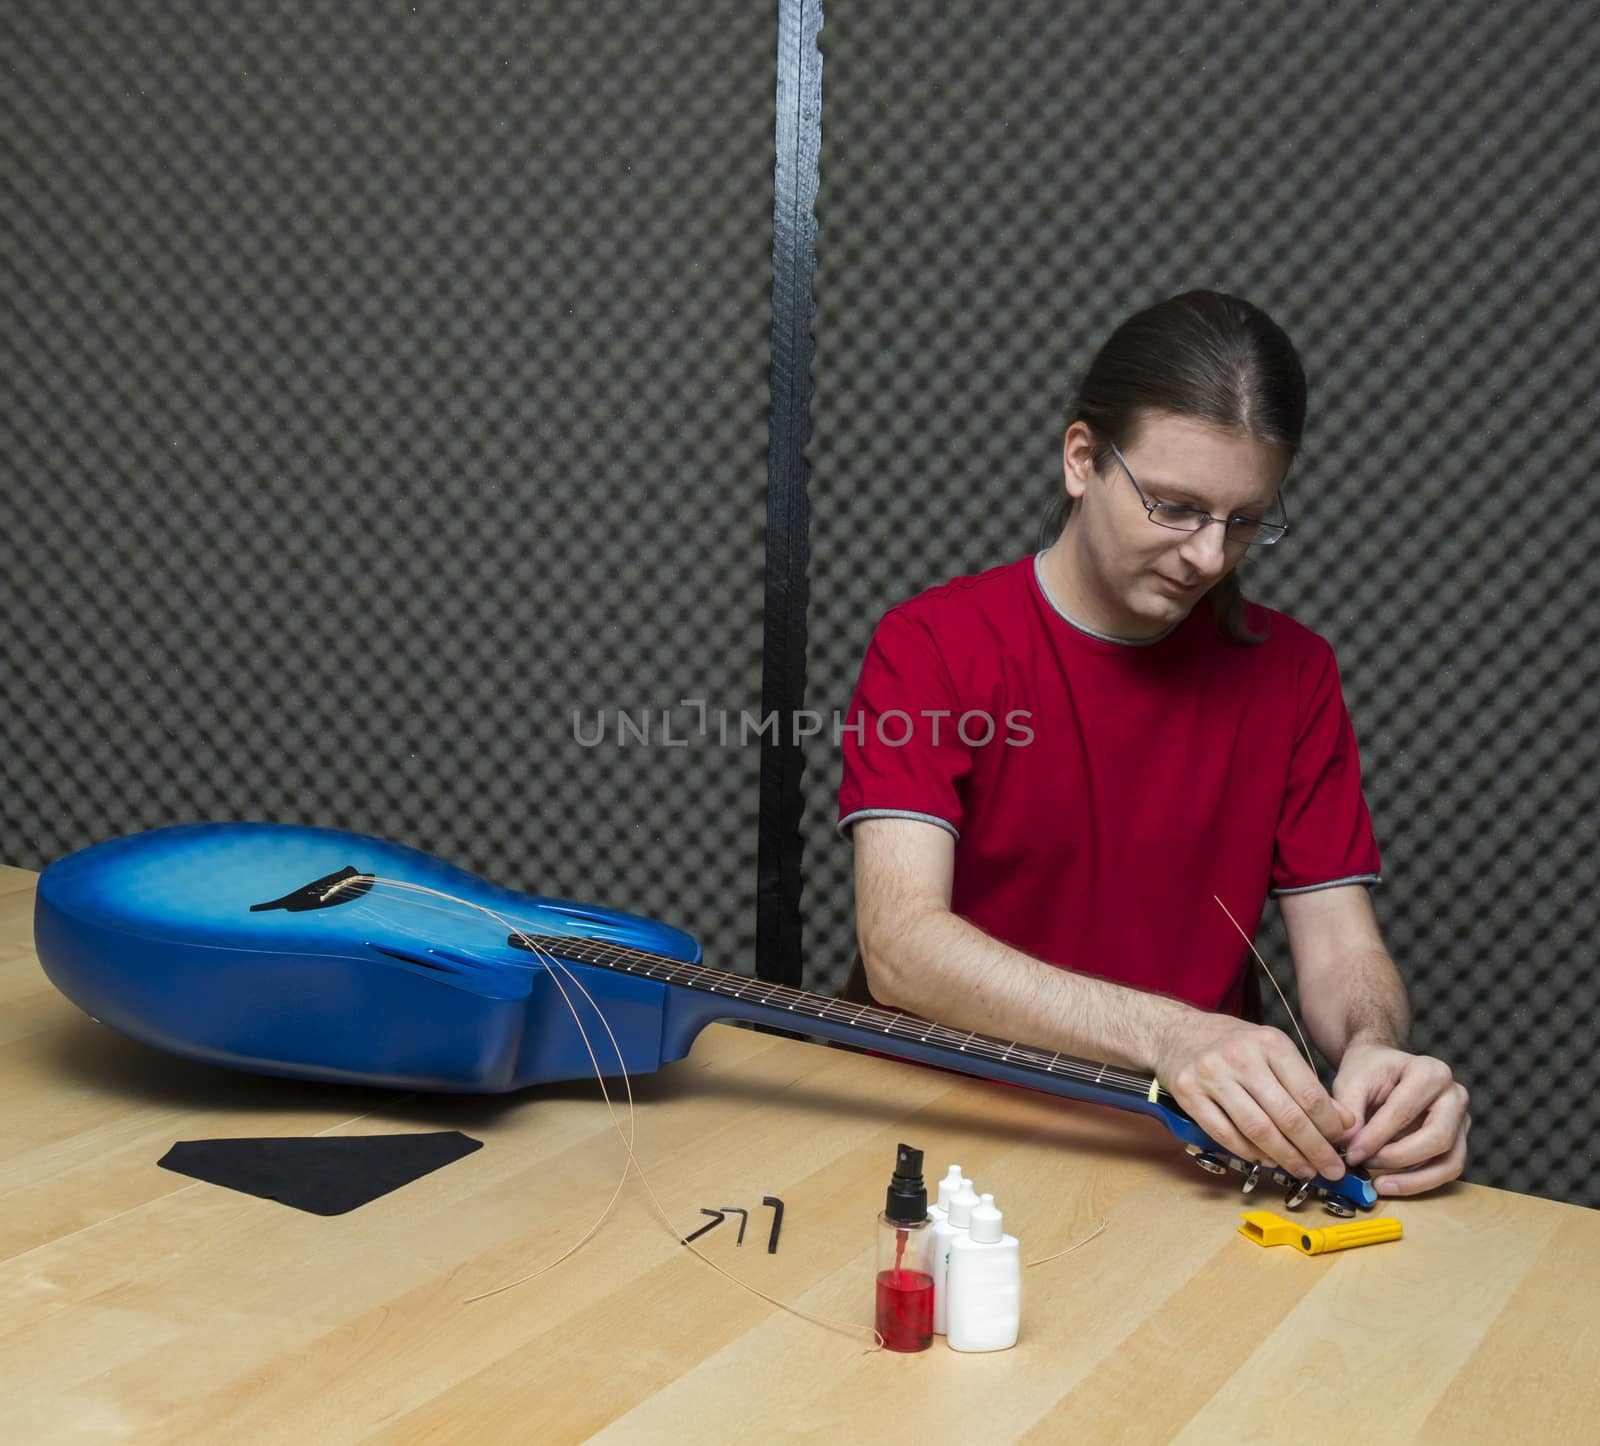 Guitar technician replacing the strings of an electro-acoustic guitar ( Series with the same model available)